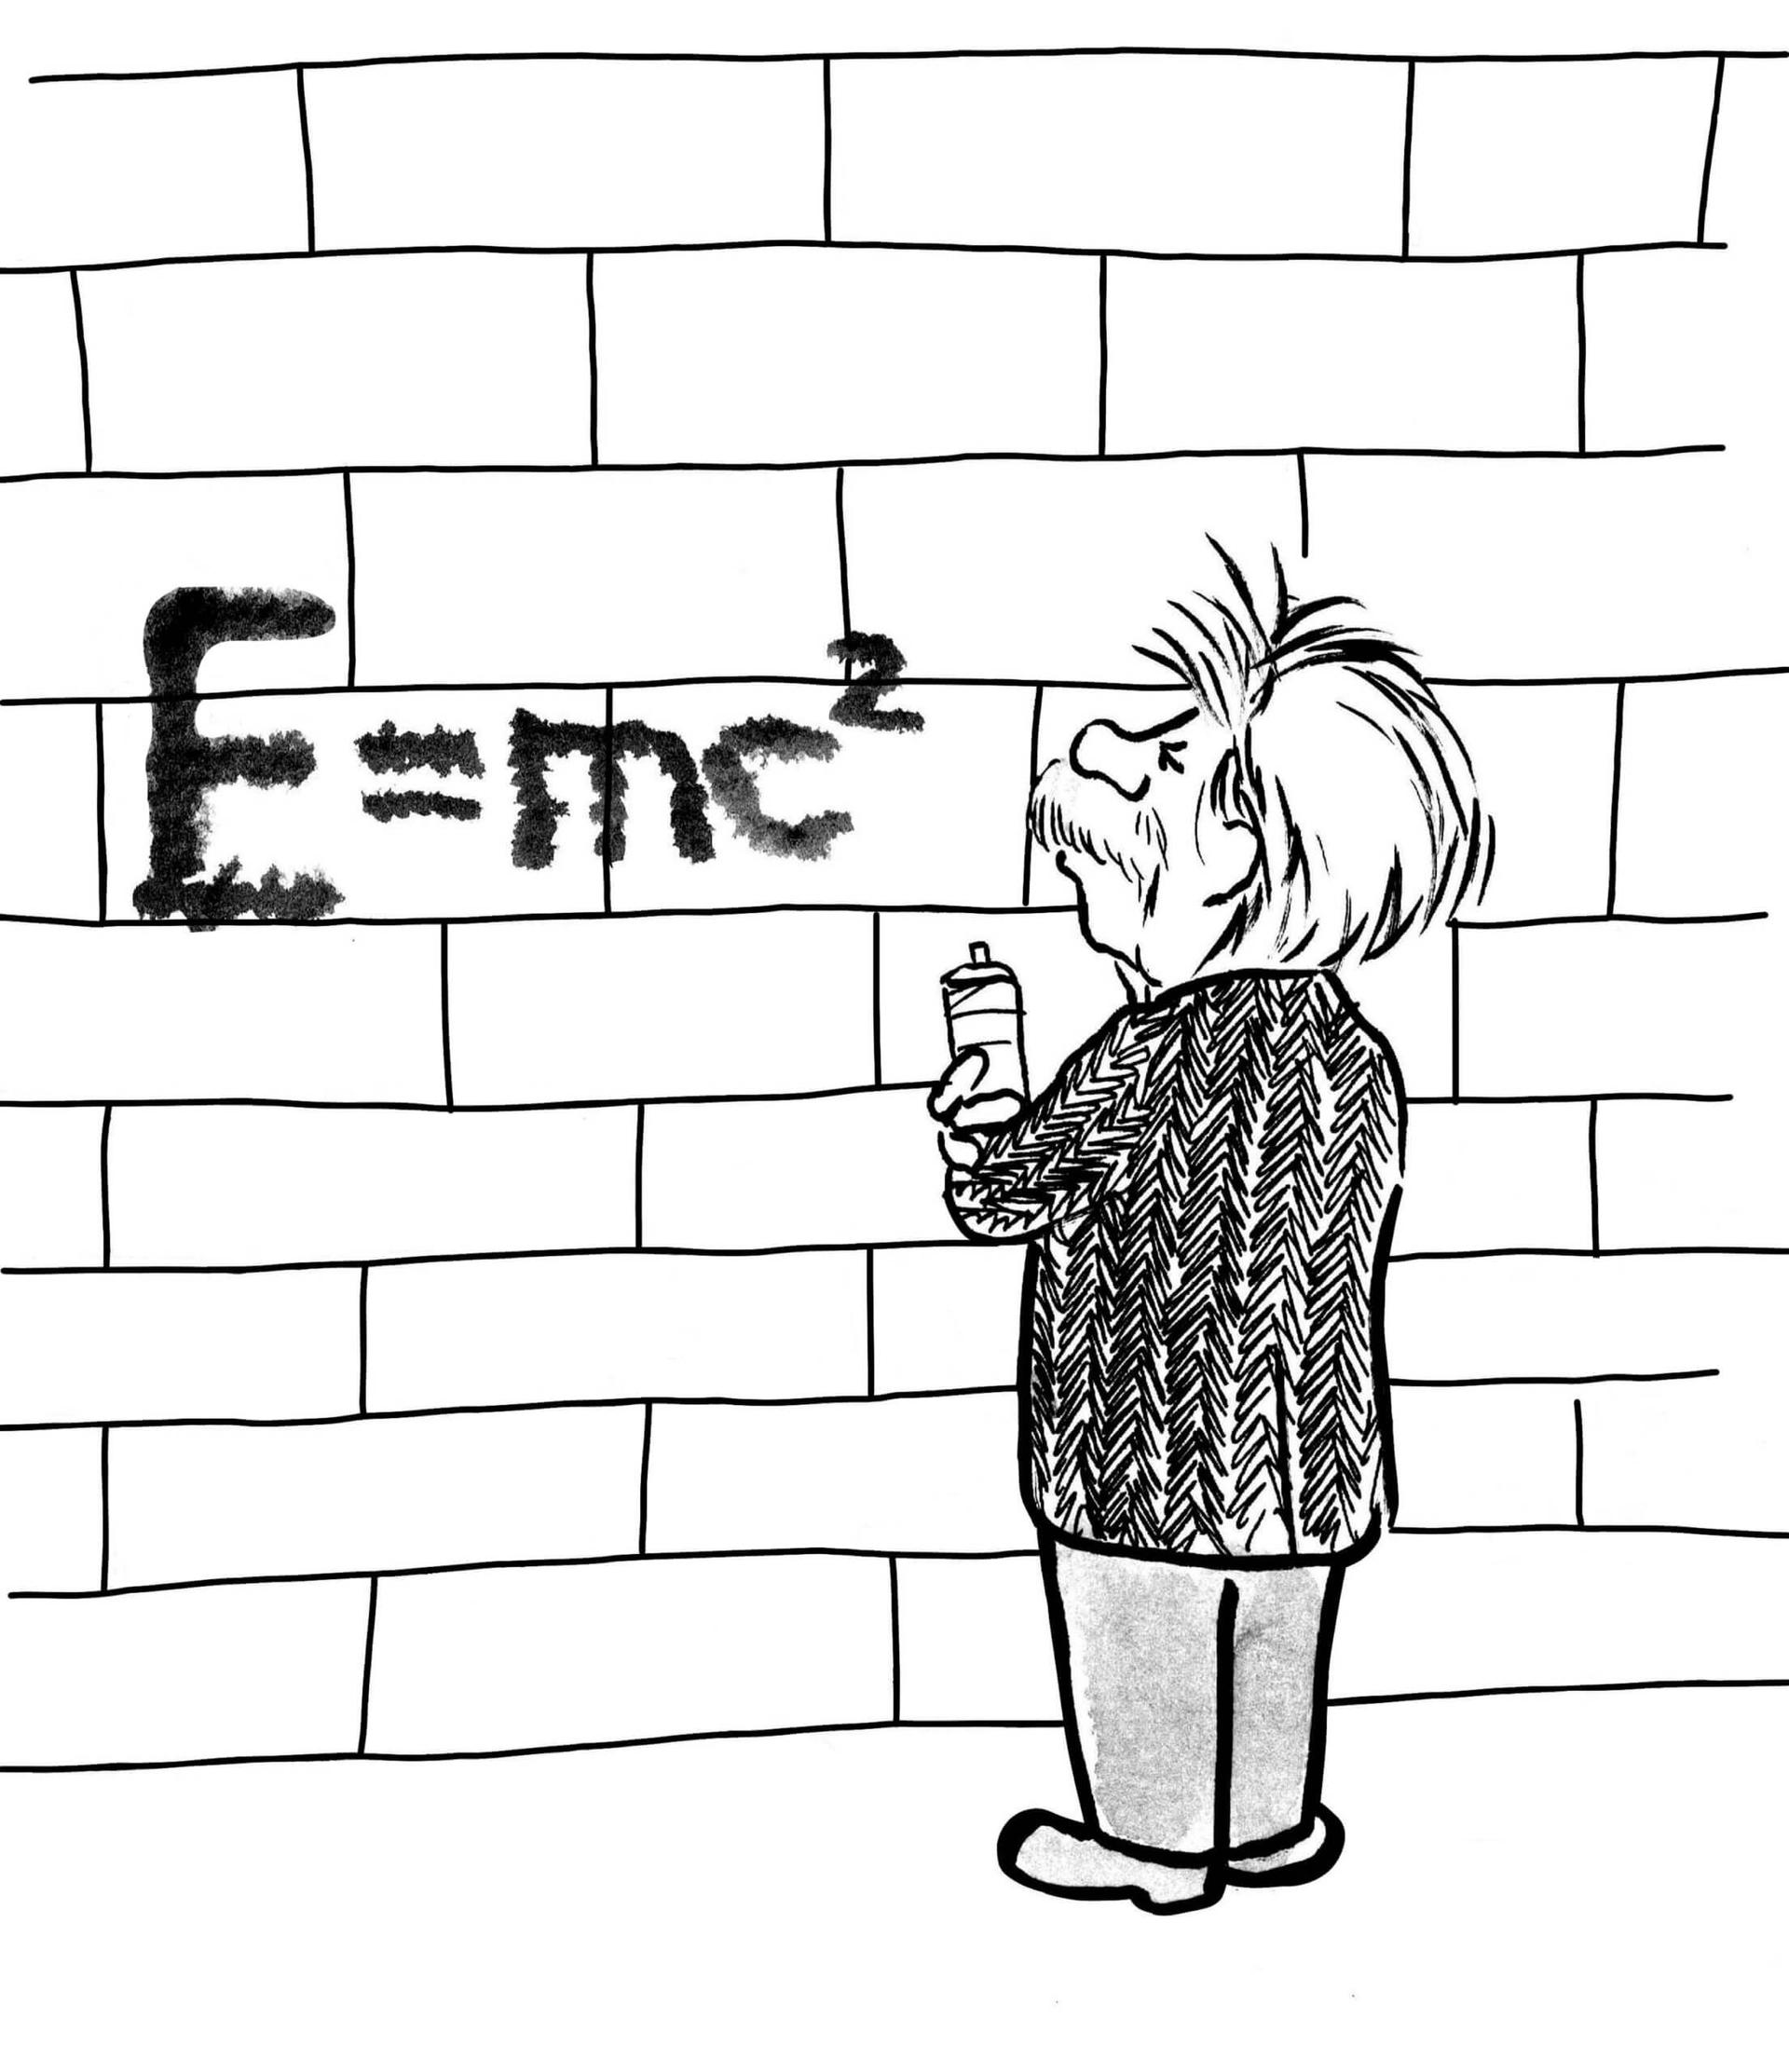 Albert Einstein in black and white long sleeve shirt standing in front of white brick wall with E=mc2 equation for his Theory of Relativity
